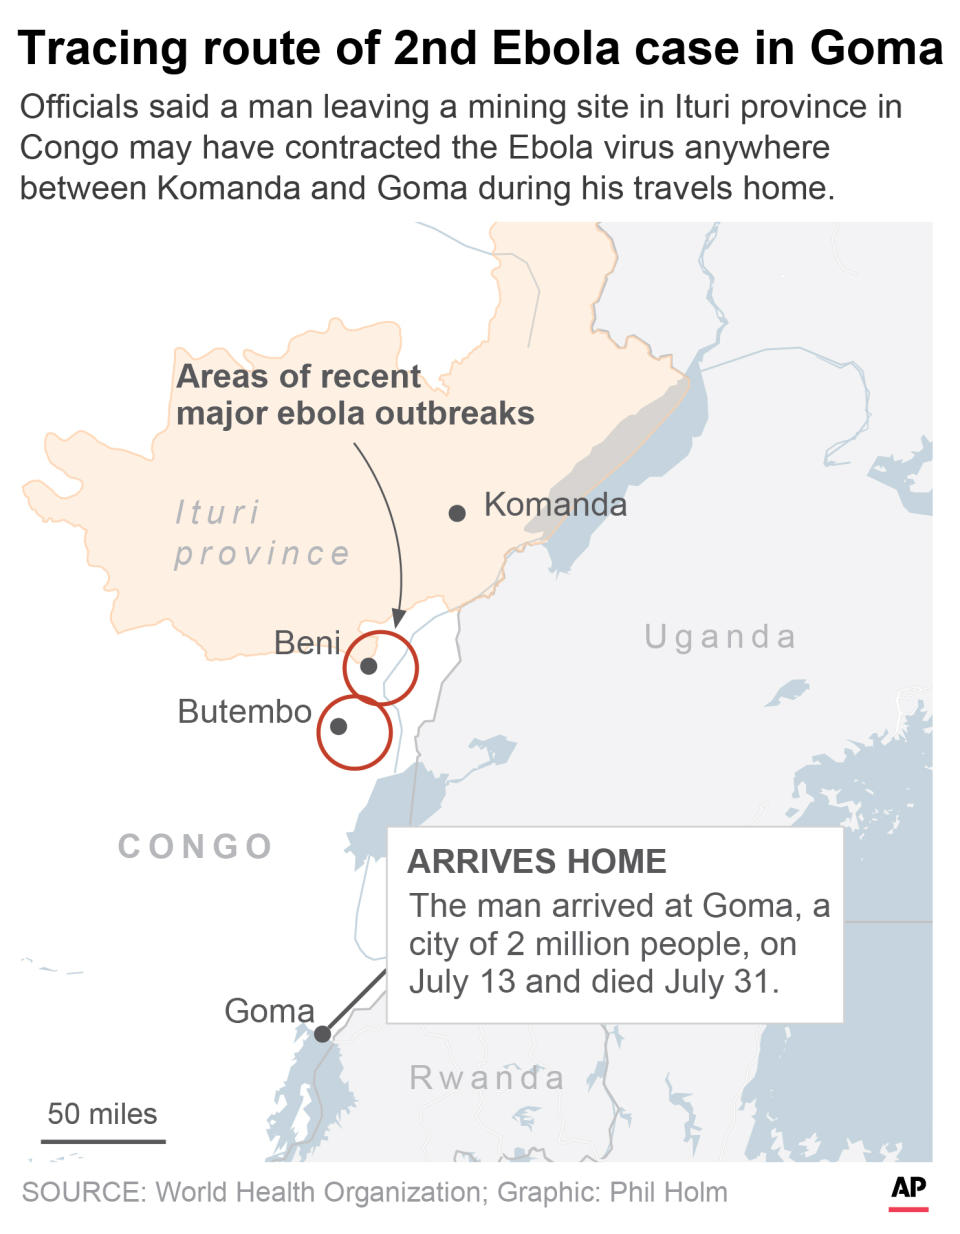 Graphic shows the last known stops of the man who contracted Ebola in Congo and traveled to the city of Goma;